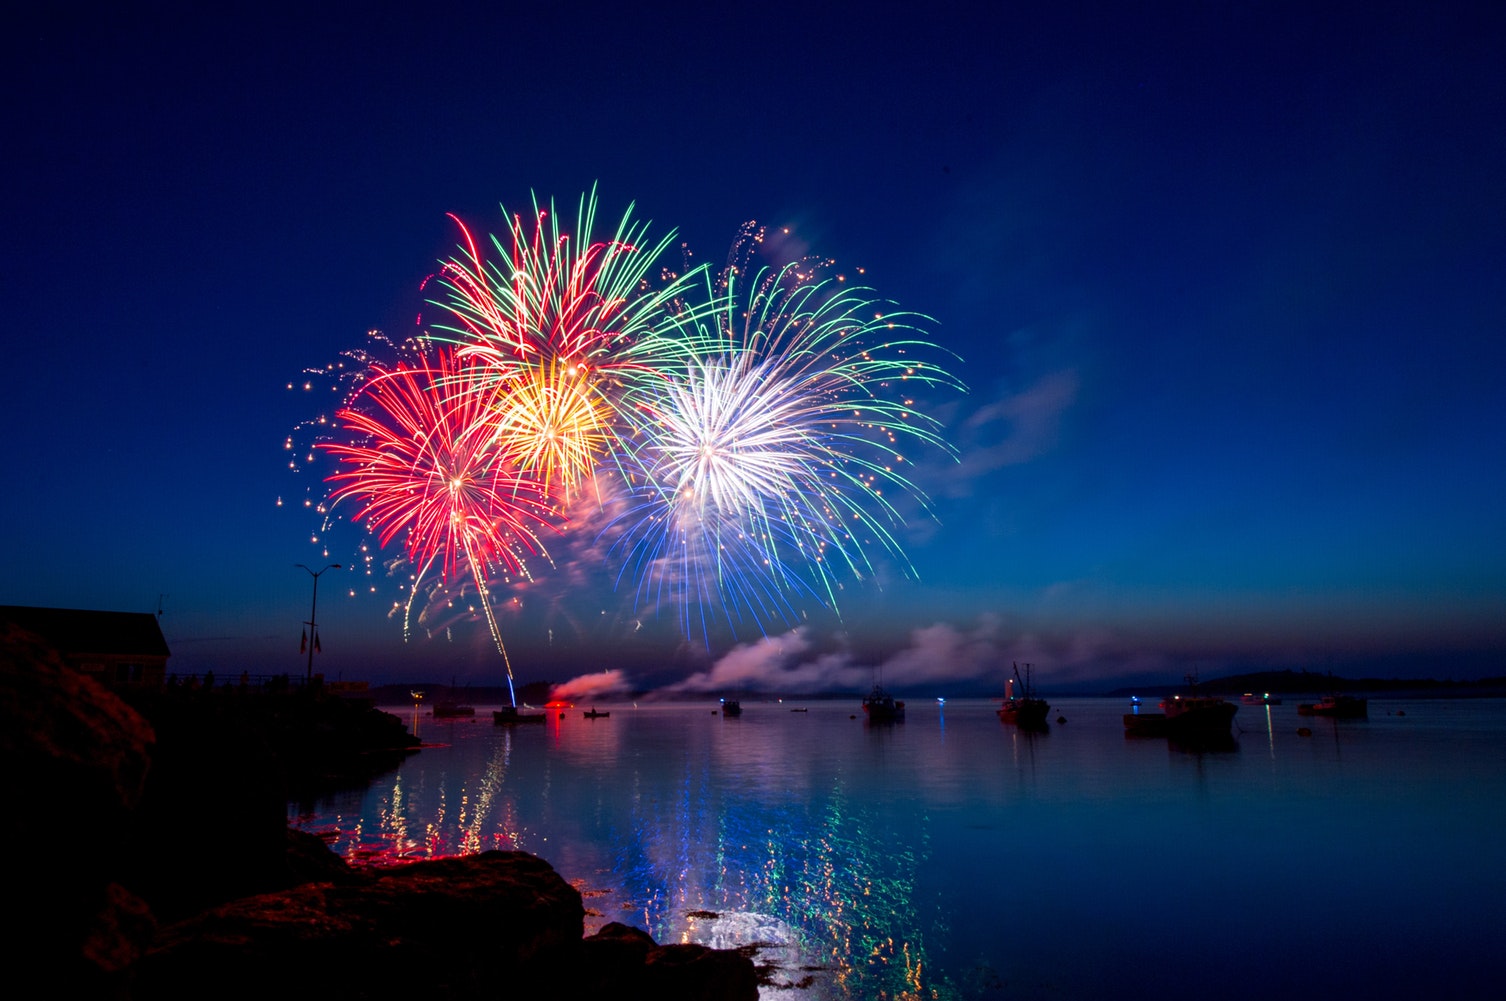 fireworks photography at night